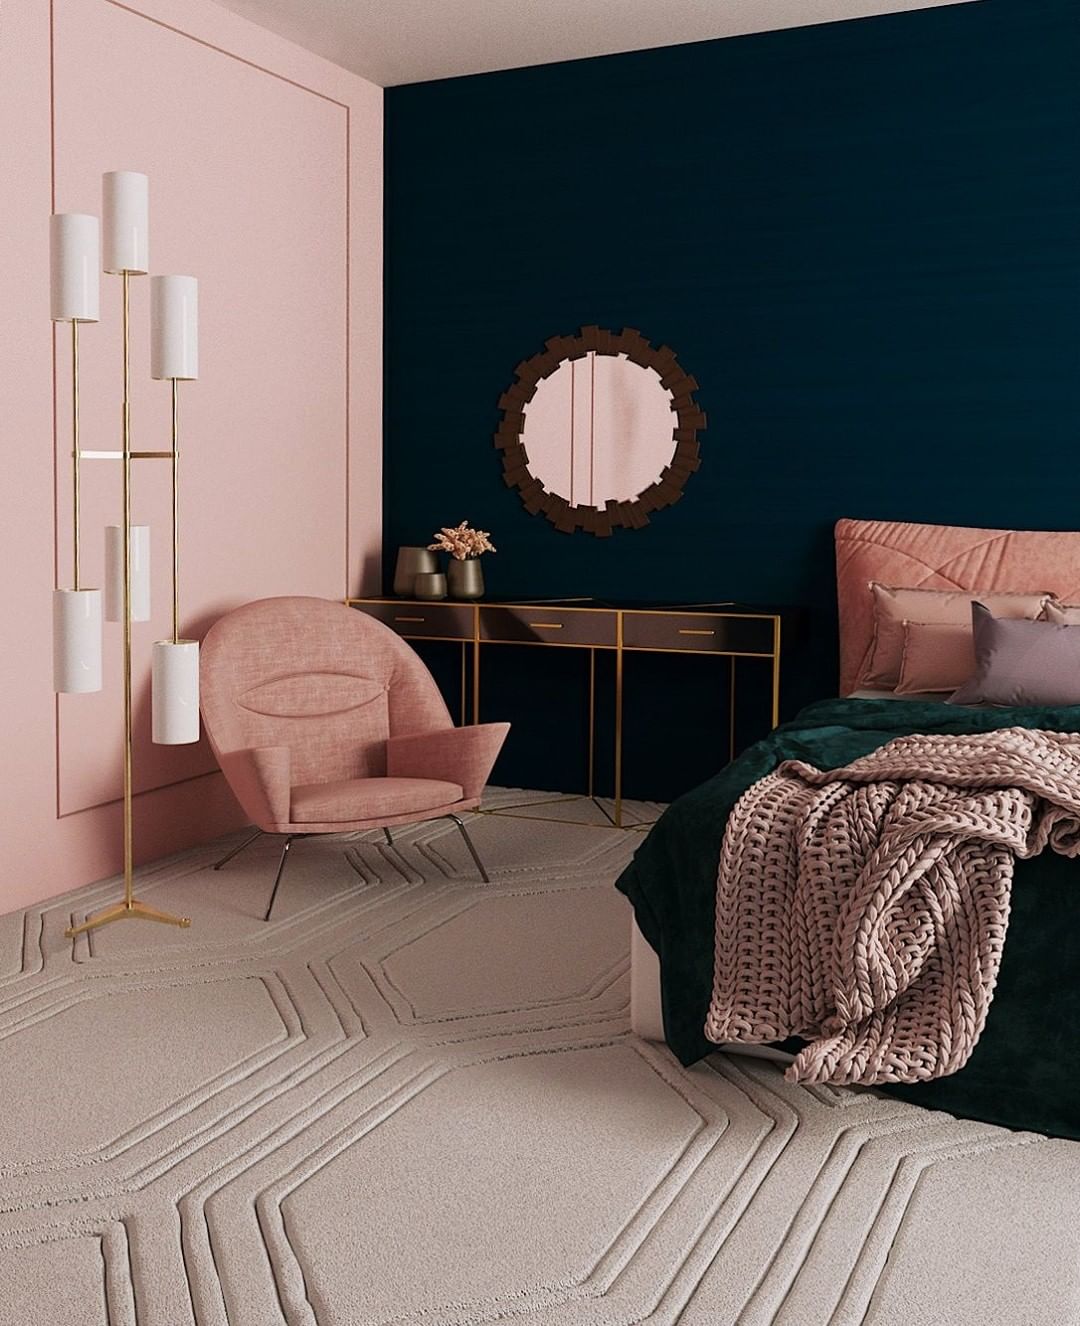 Genuine Pink Interior Design - How to Add This Trend Color to Your Home010